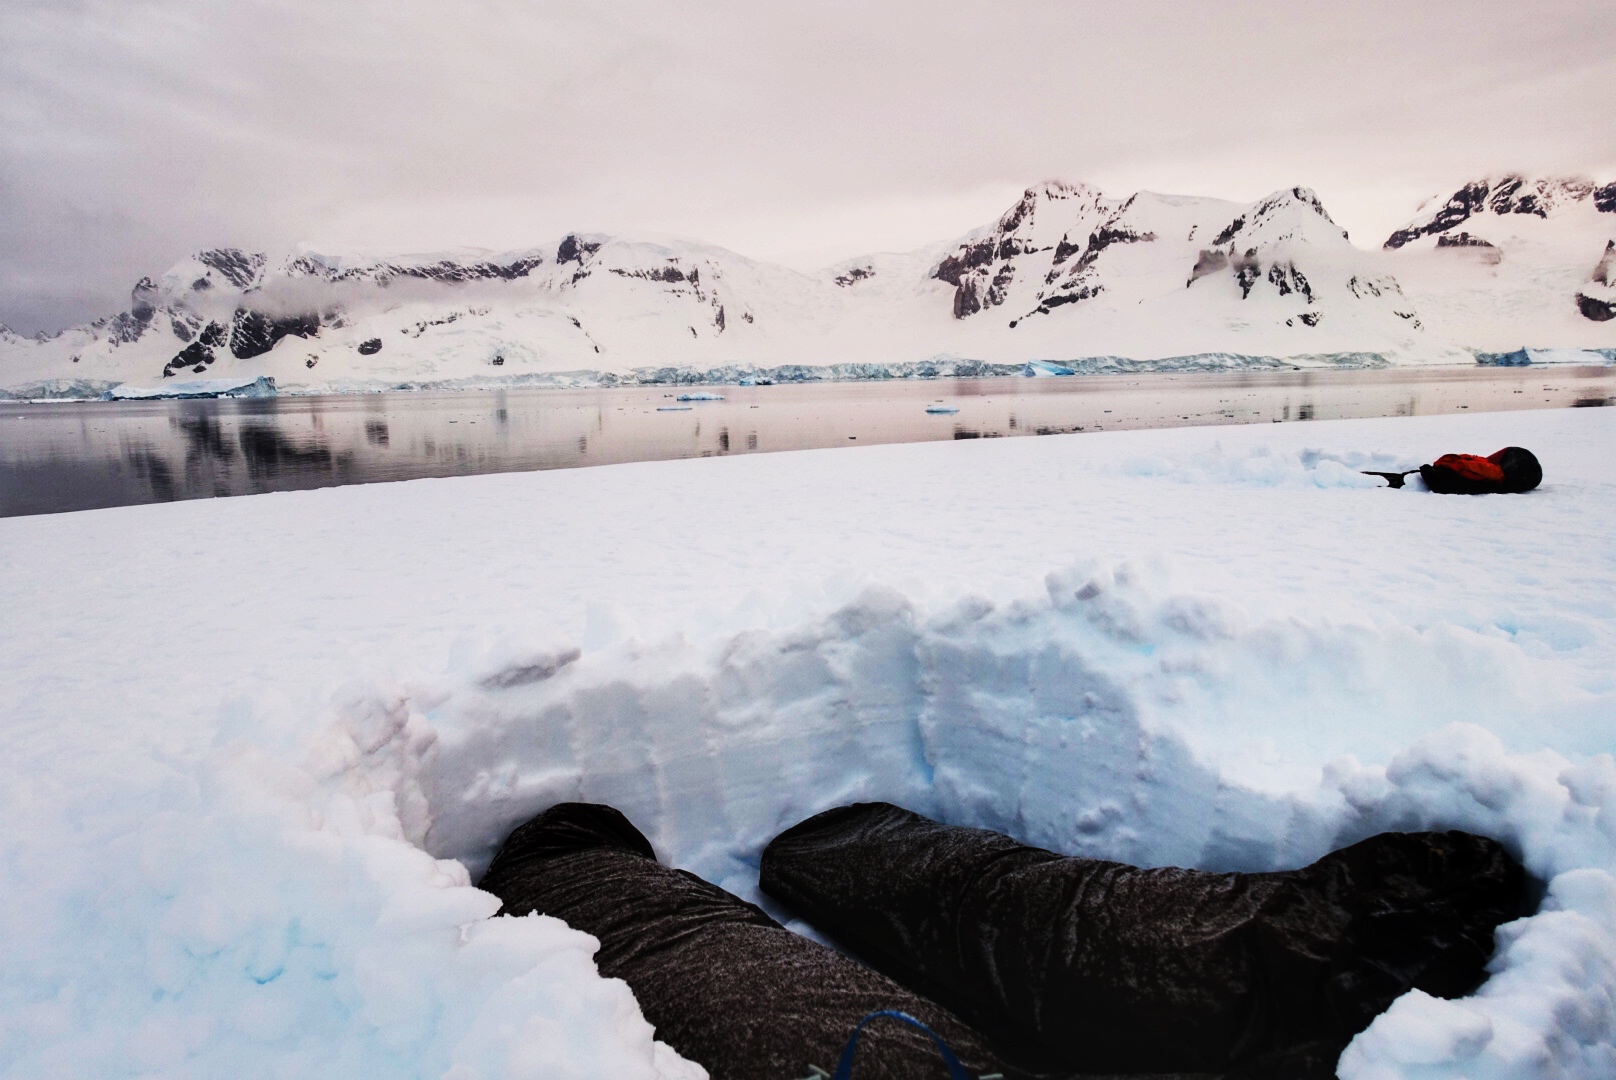 Camping in Antarctica: 2 sleeping bags in a snow hole with snow-covered mountains in the background